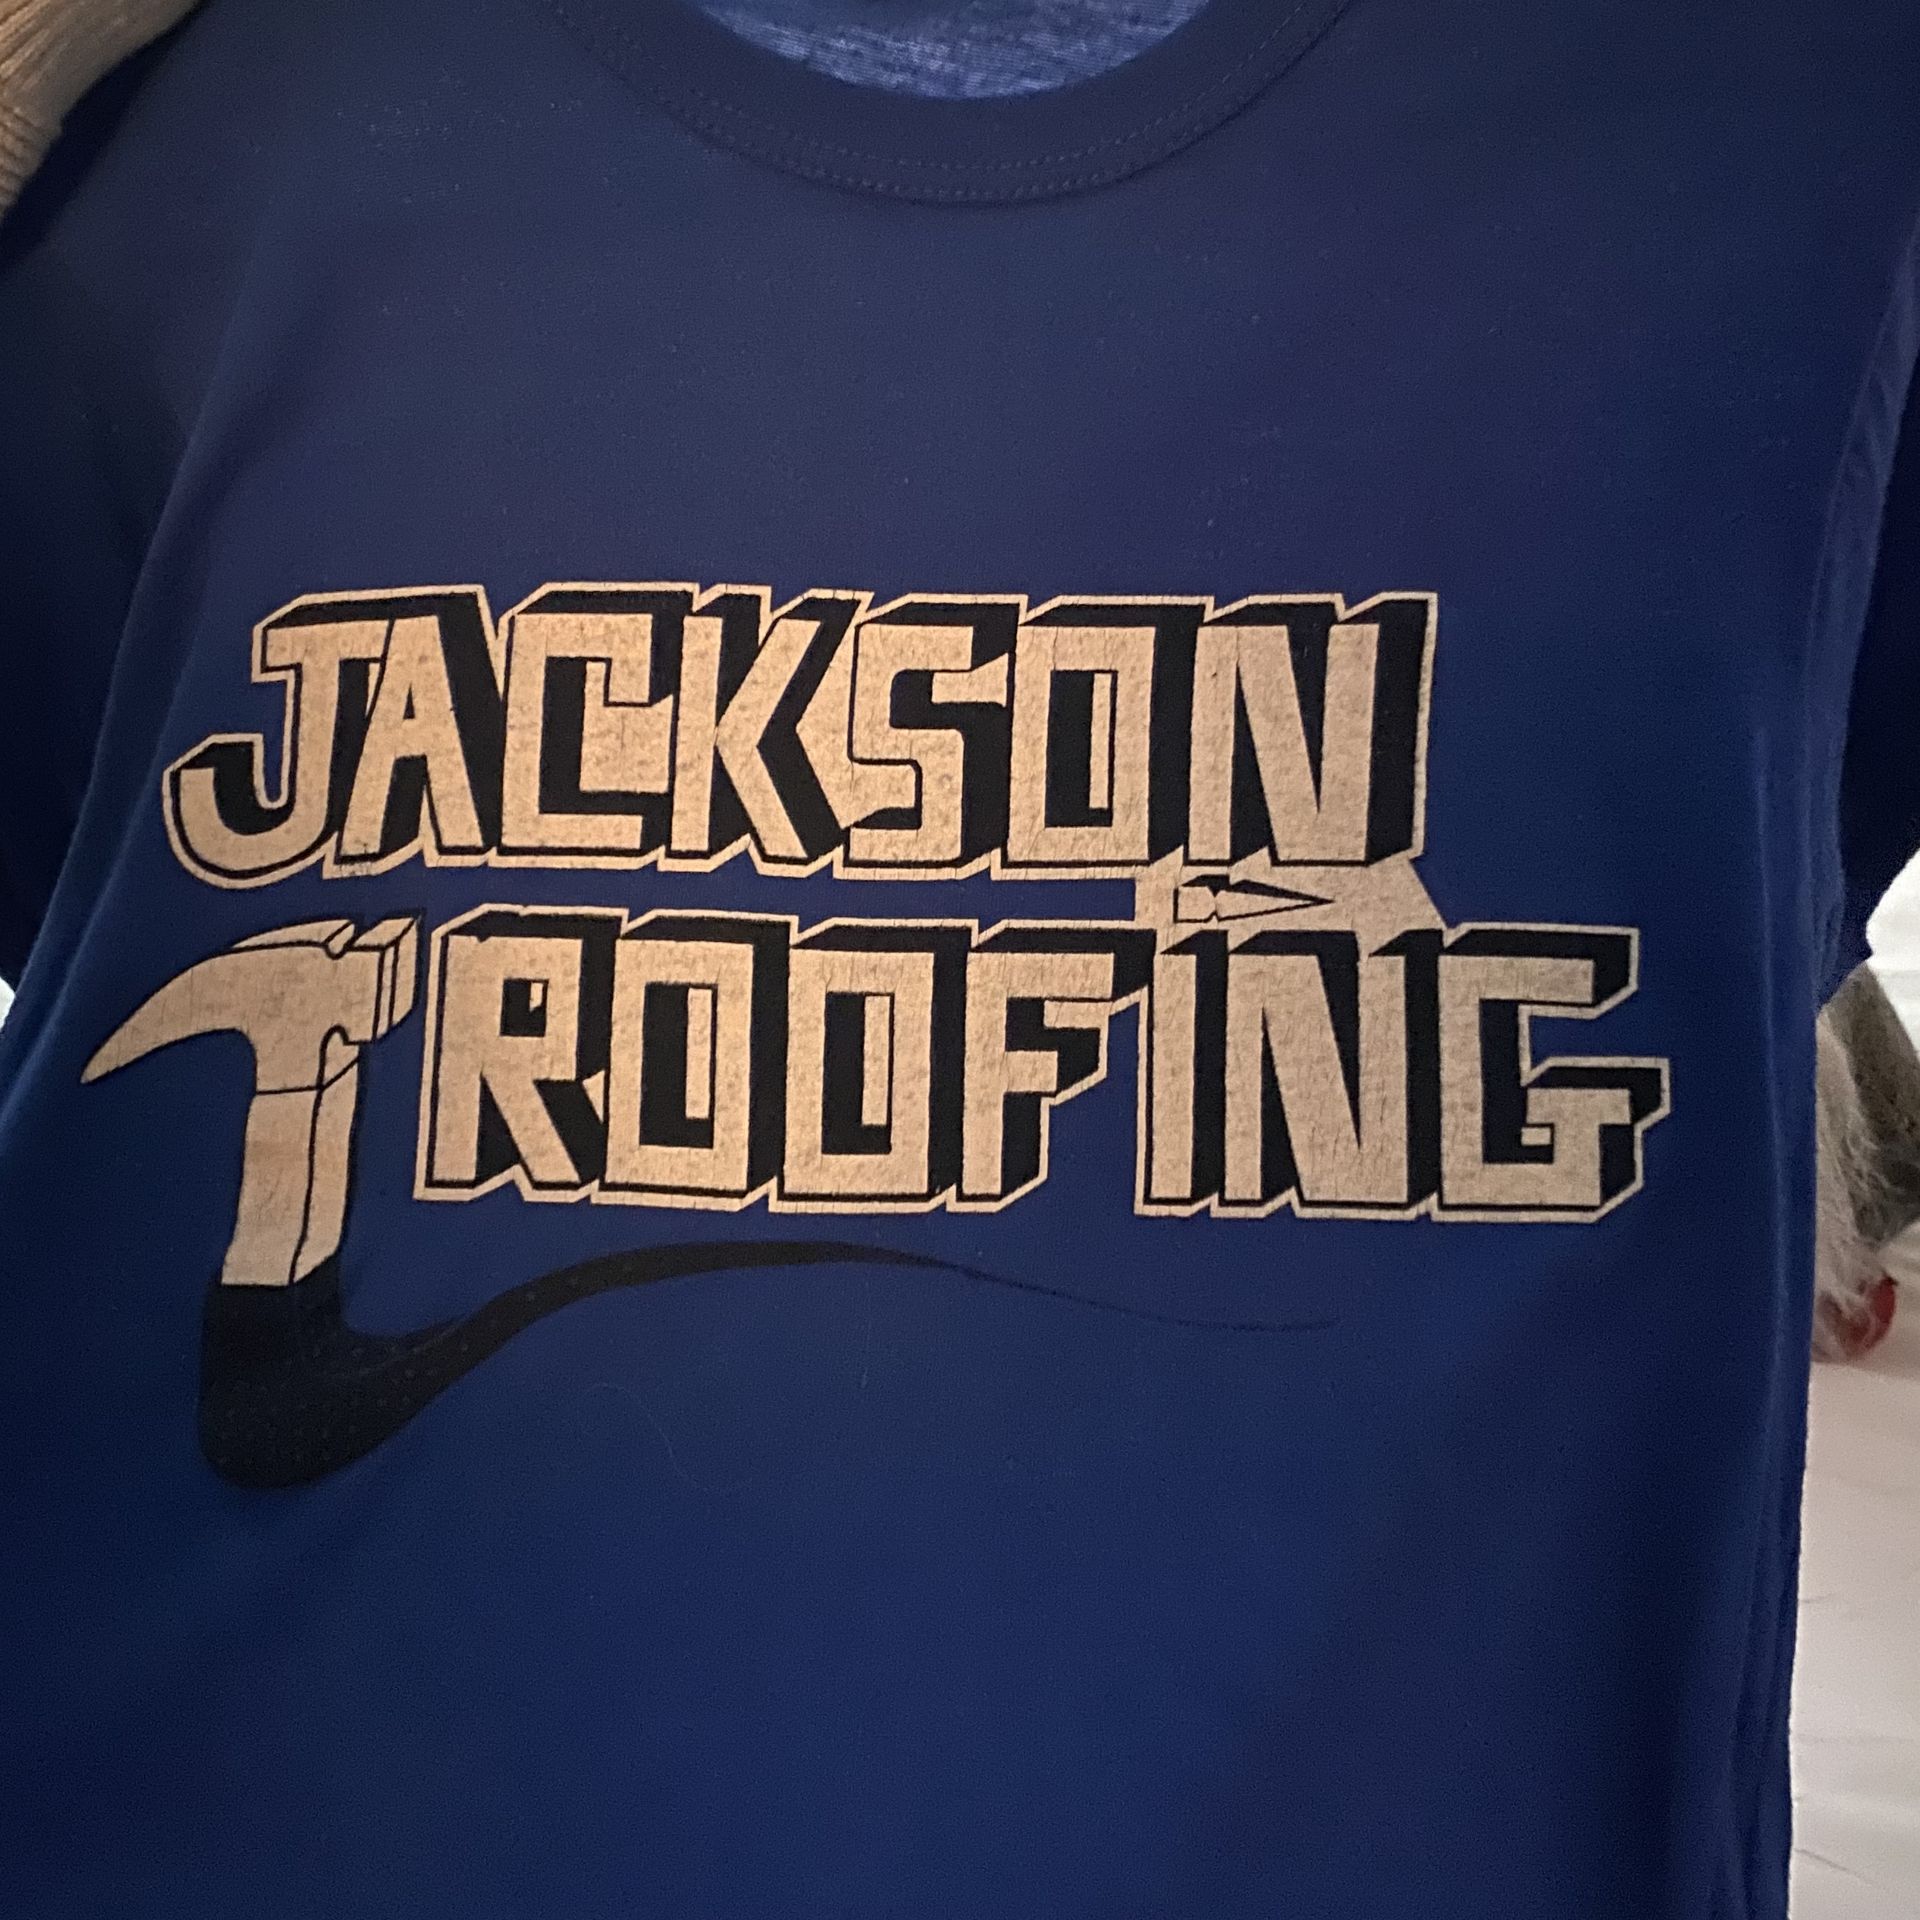 A blue shirt that says jackson roofing on it